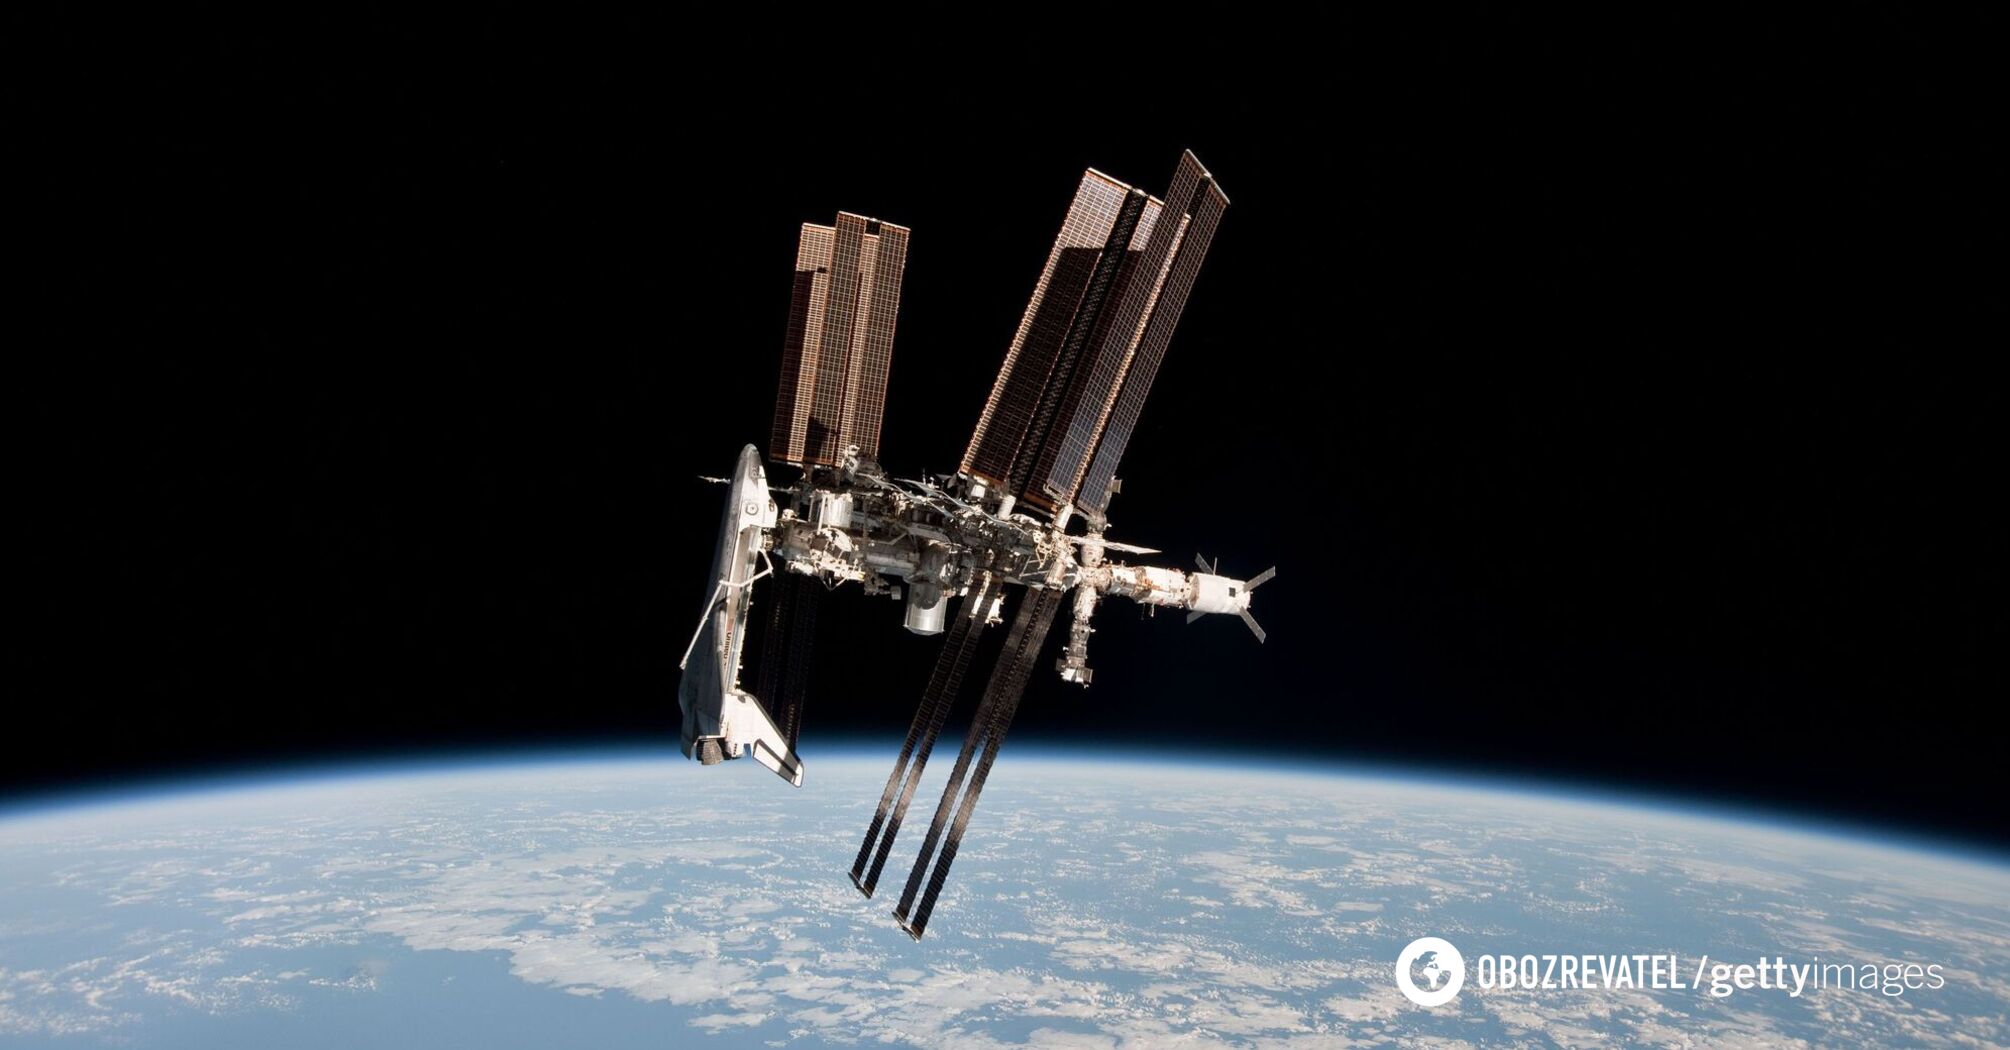 Broke into more than 100 pieces: ISS astronauts forced to hide in shelter for an hour due to Russian satellite